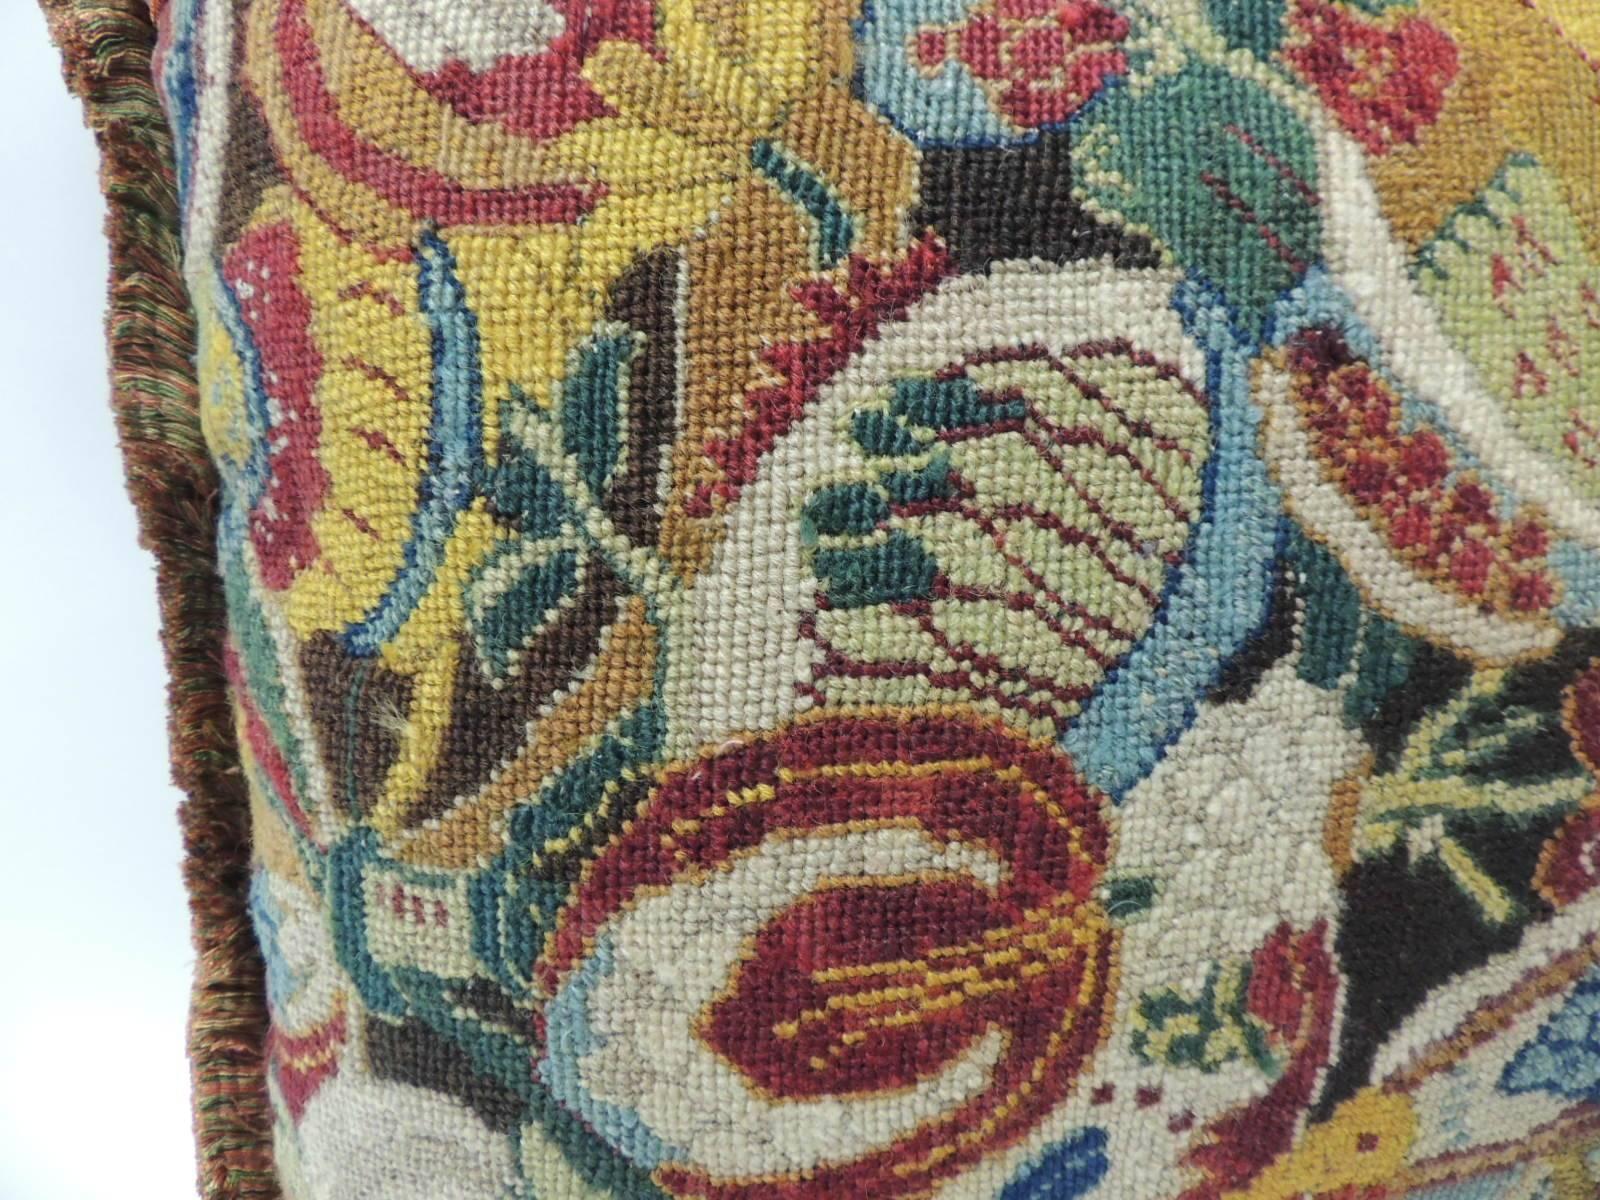 French needlework tapestry decorative multi-color pillow hand-stitched with an 18th century fragment that depicts a floral pattern. The color palette in the front panel depicts shades of mustard, yellow, green, orange, glue and garnet red. To